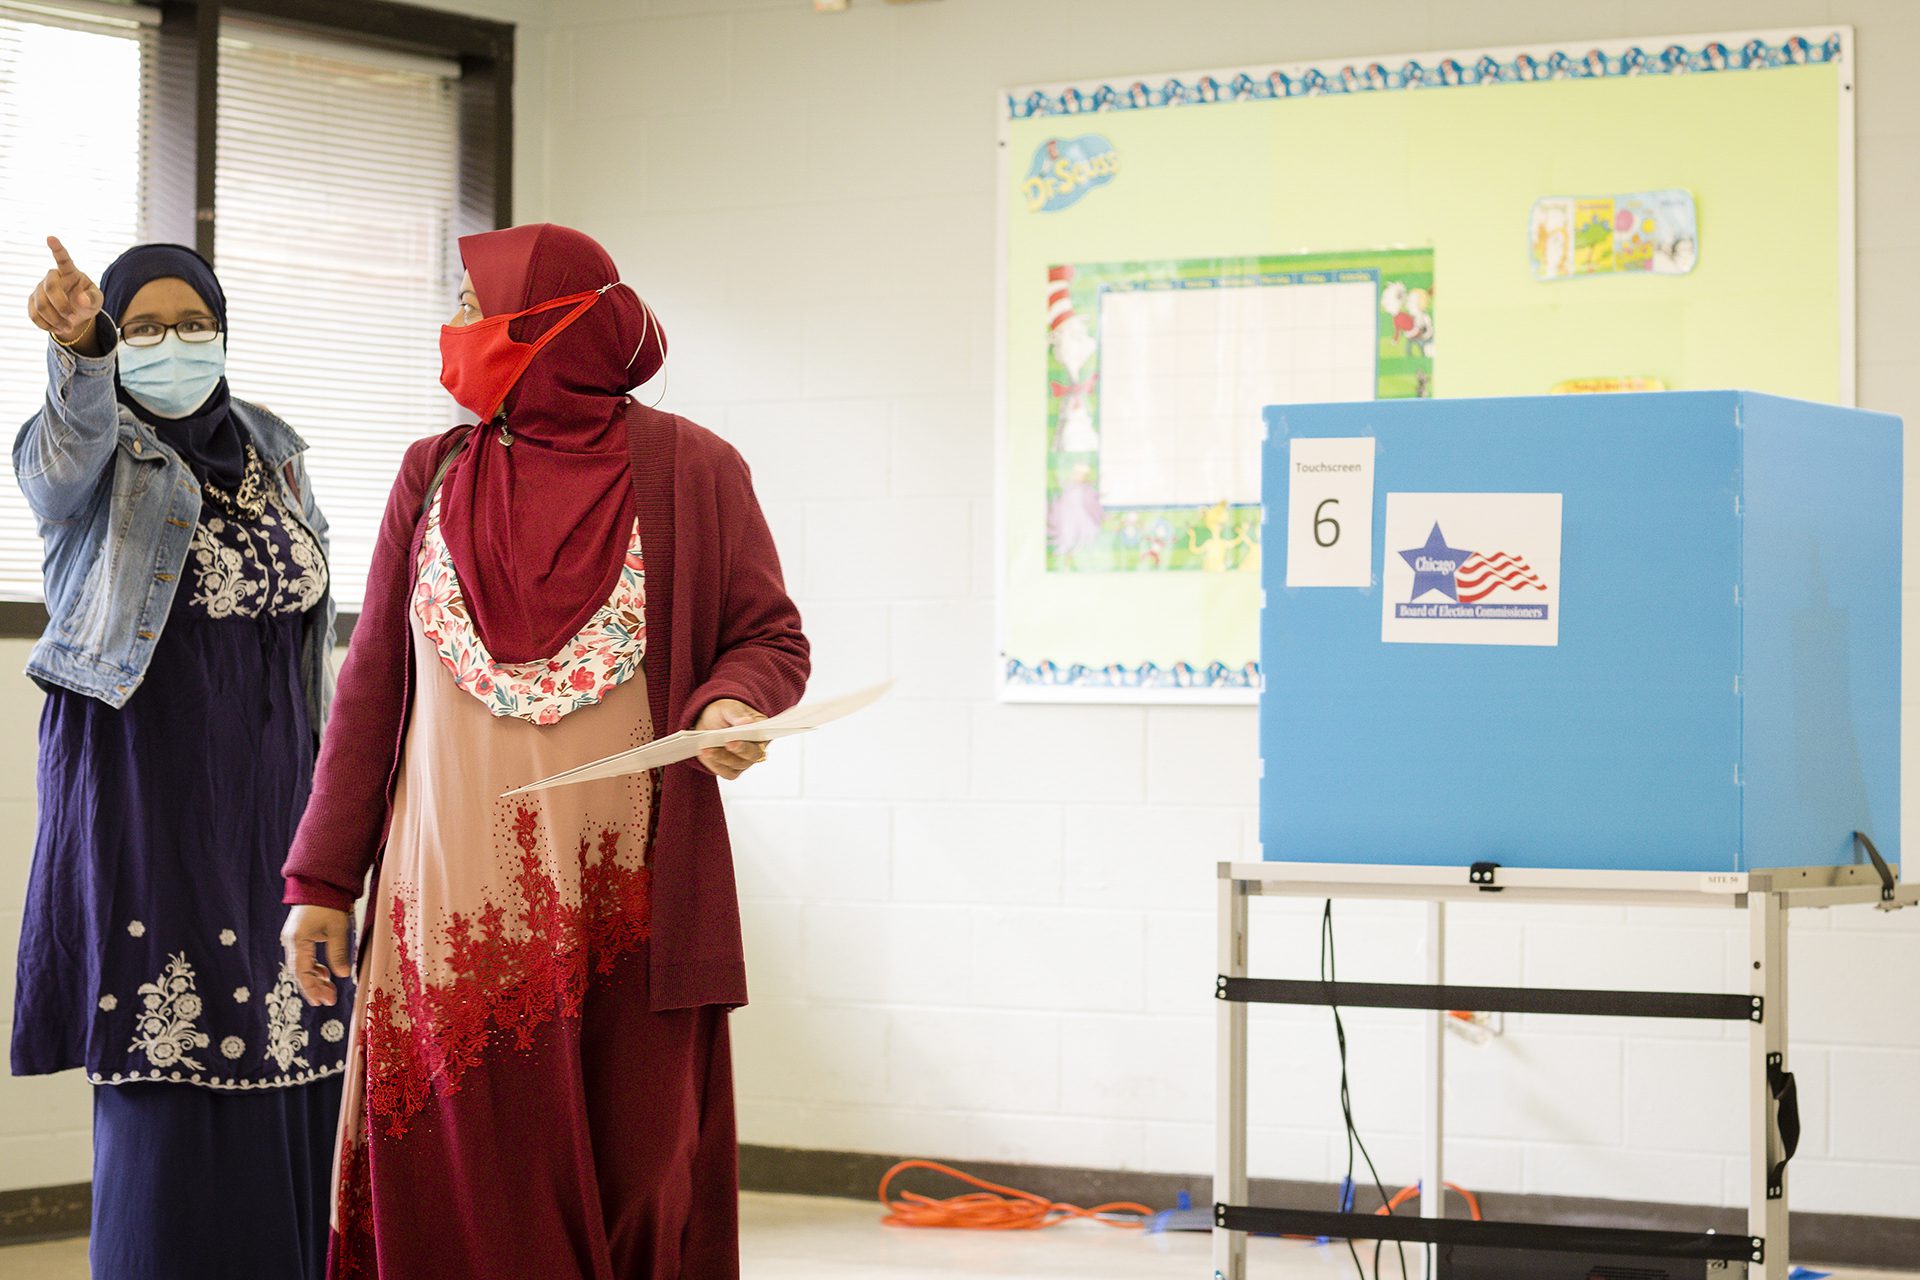 A woman in a red hijab votes